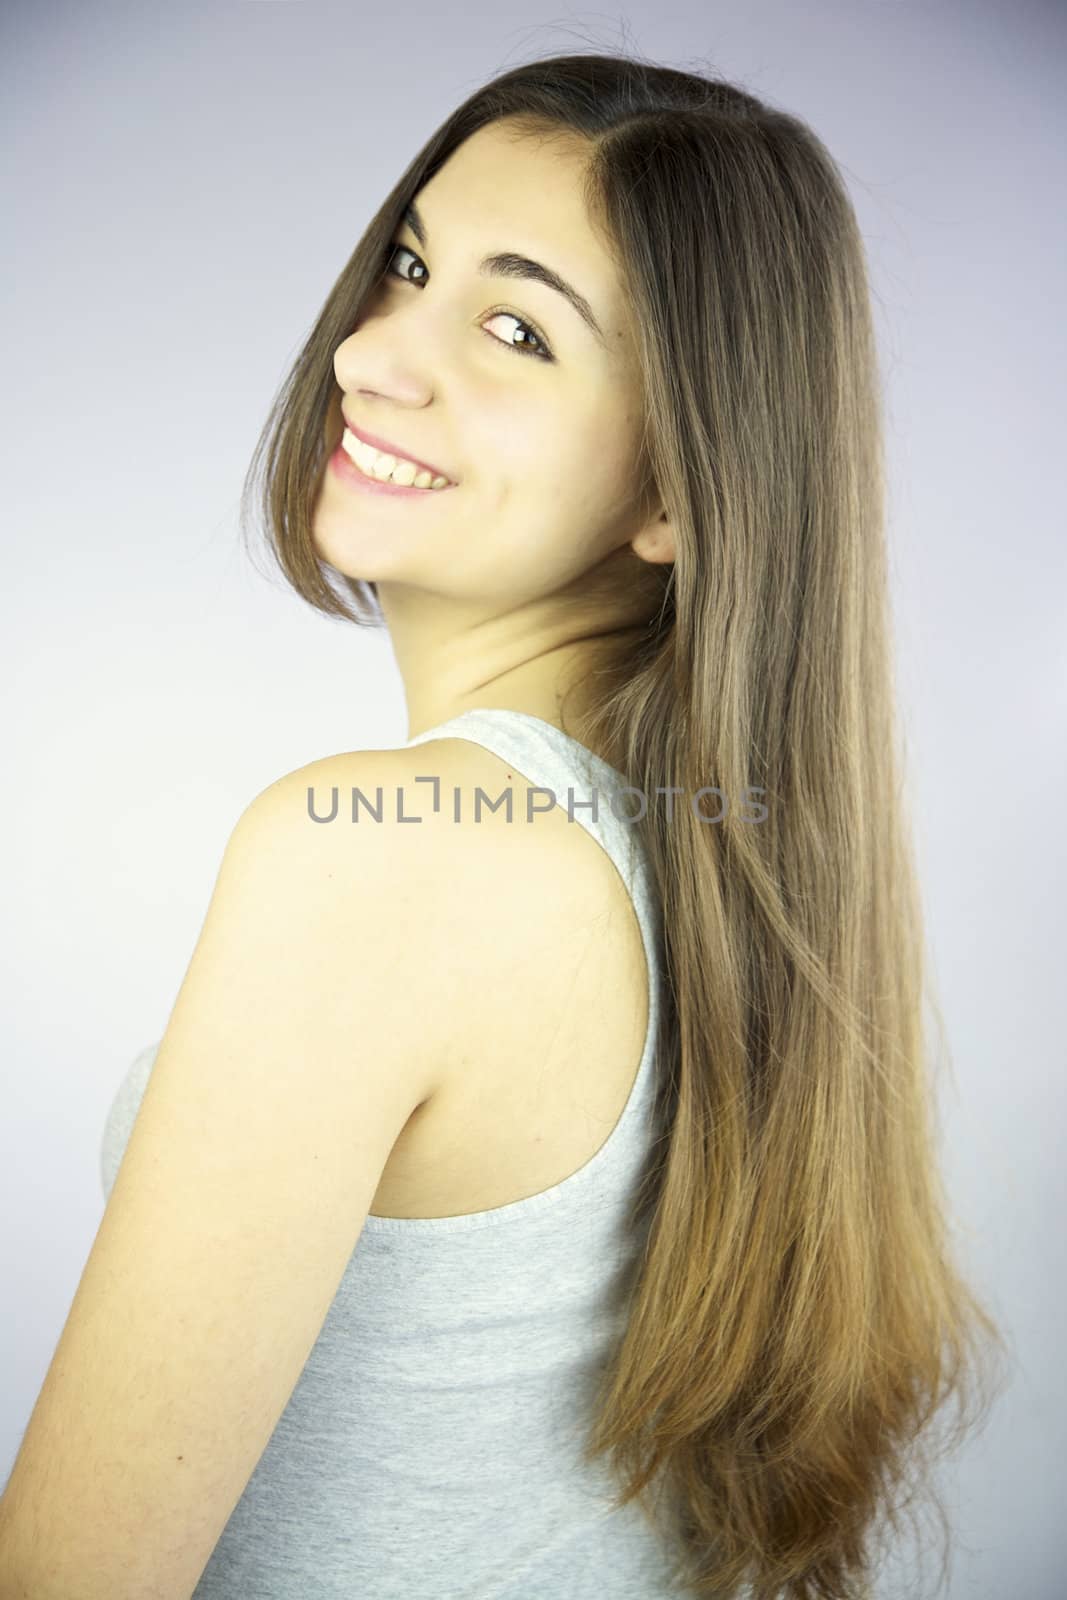 Brunette with long hair smiling happy by fmarsicano